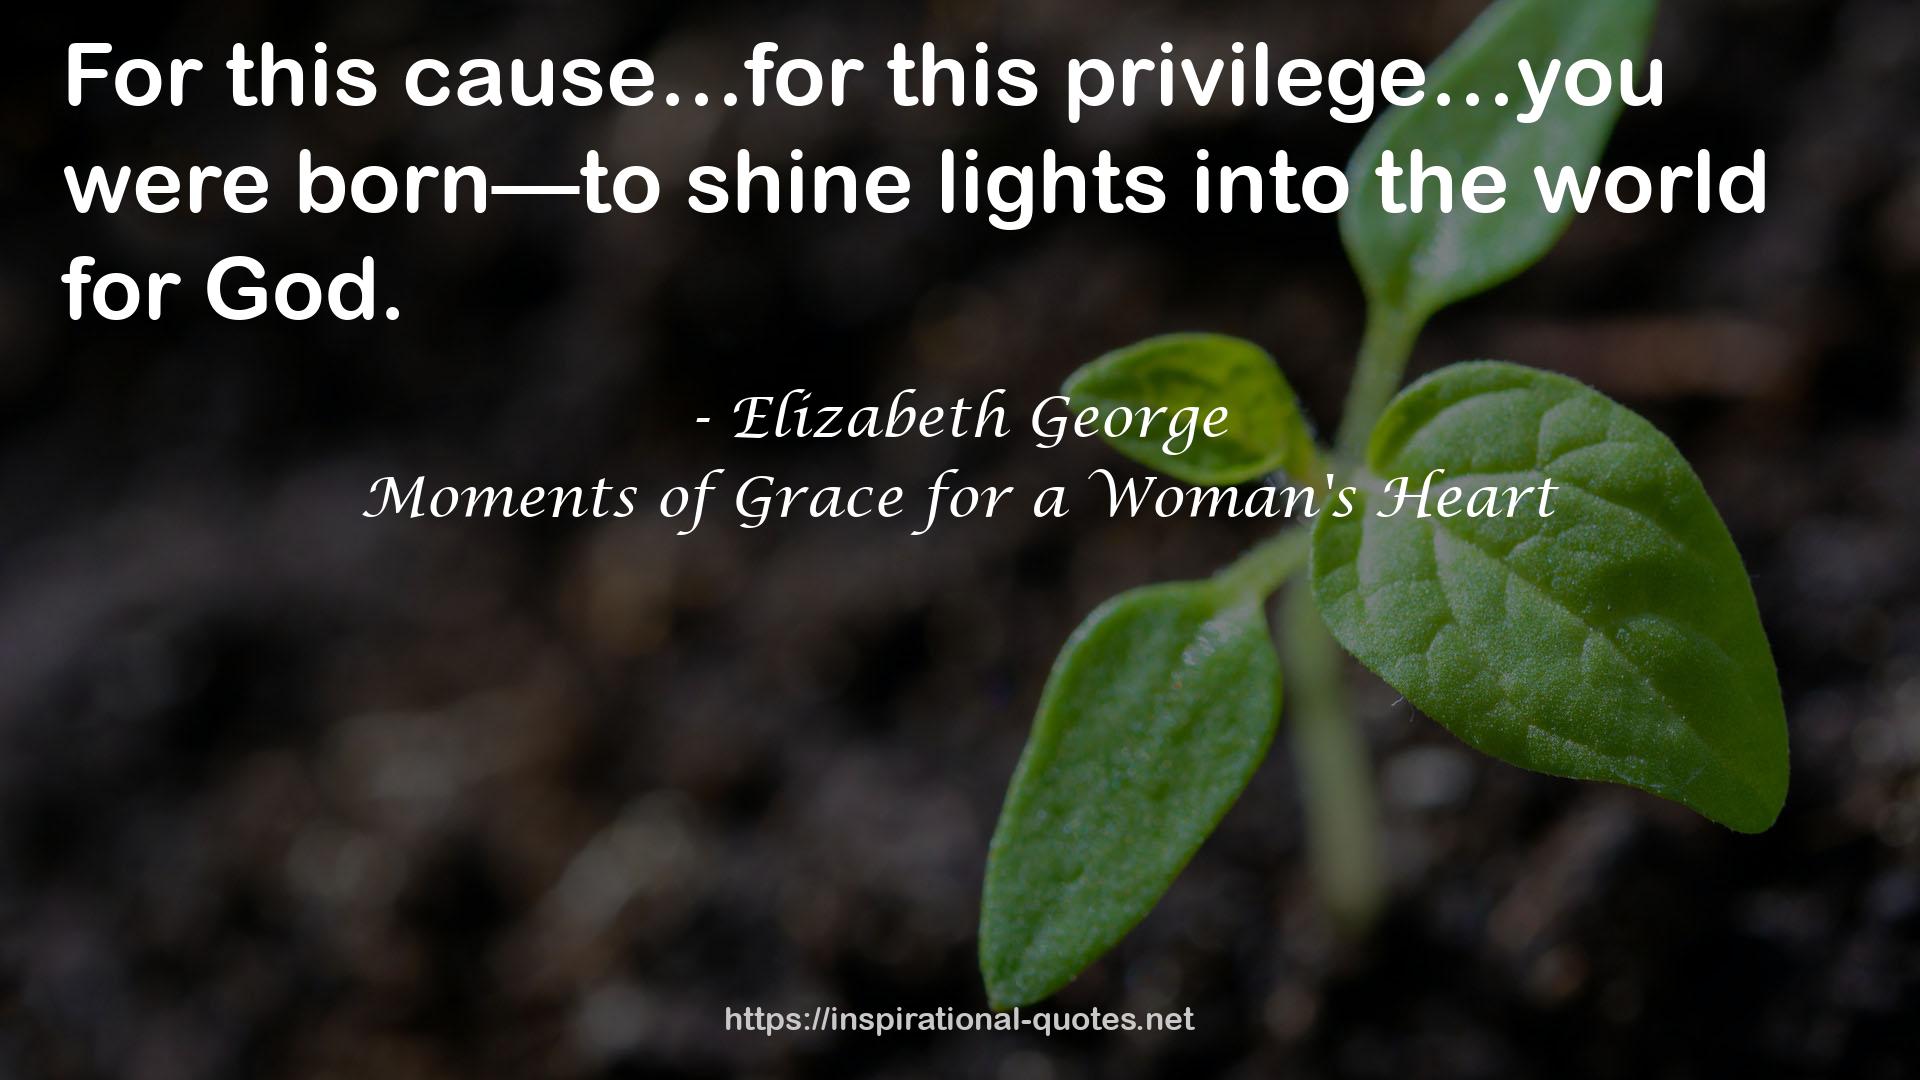 Moments of Grace for a Woman's Heart QUOTES